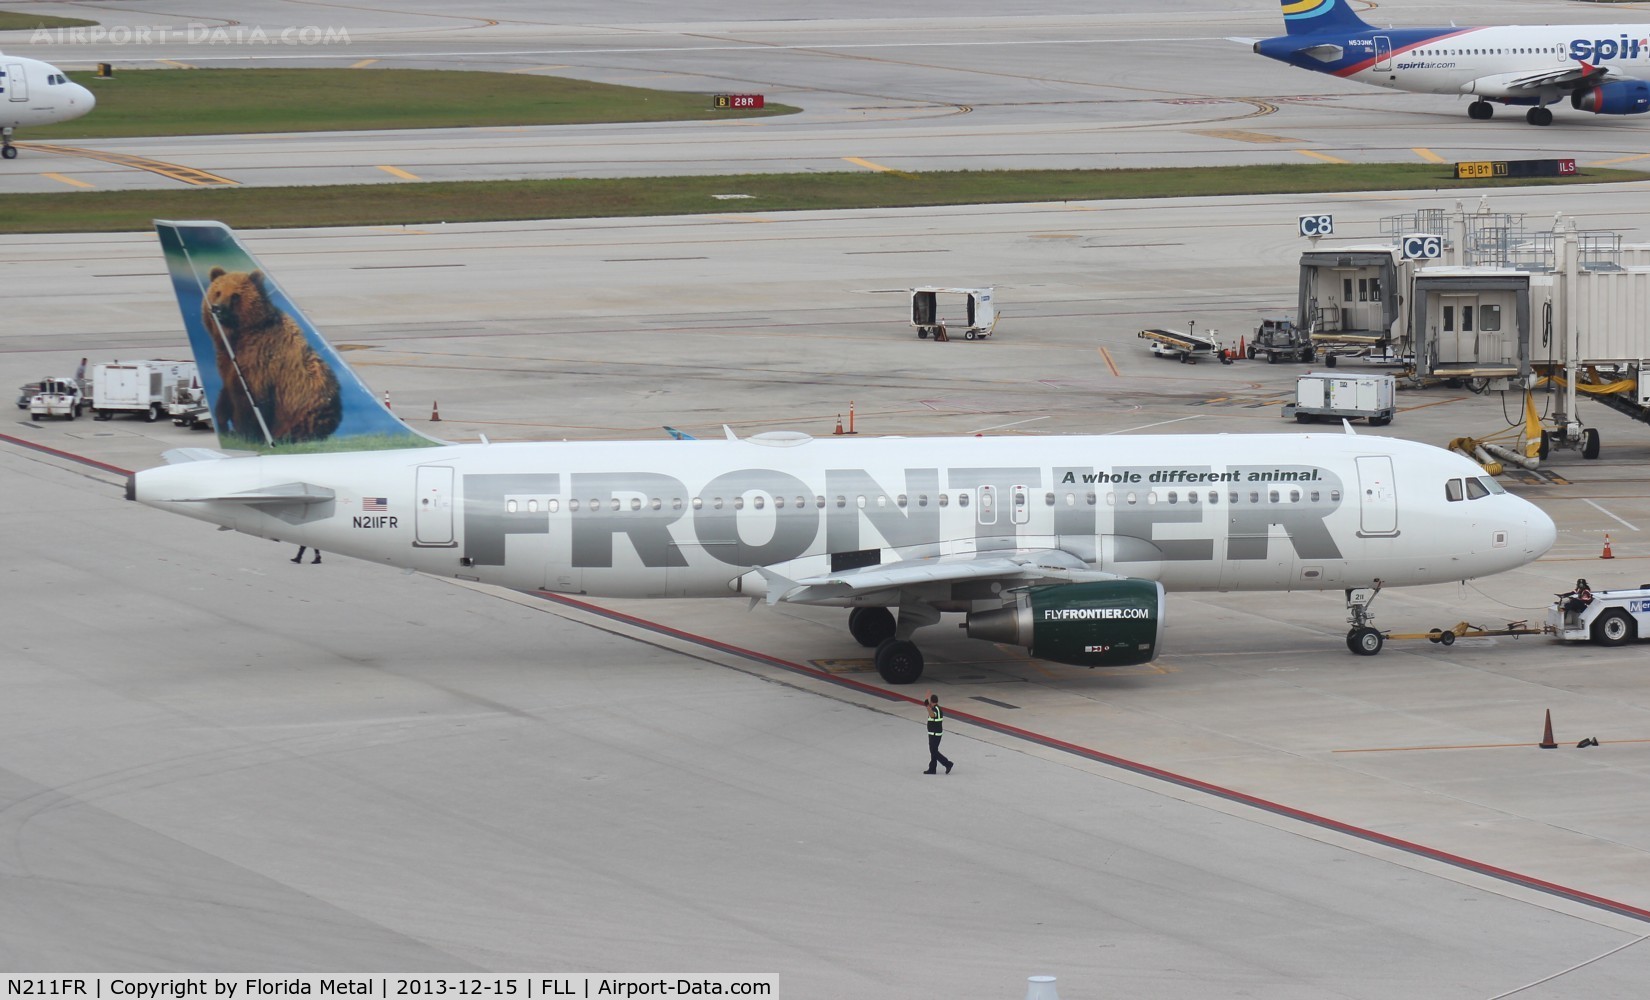 N211FR, 2011 Airbus A320-214 C/N 4688, Frontier Grizwald the Grizzly